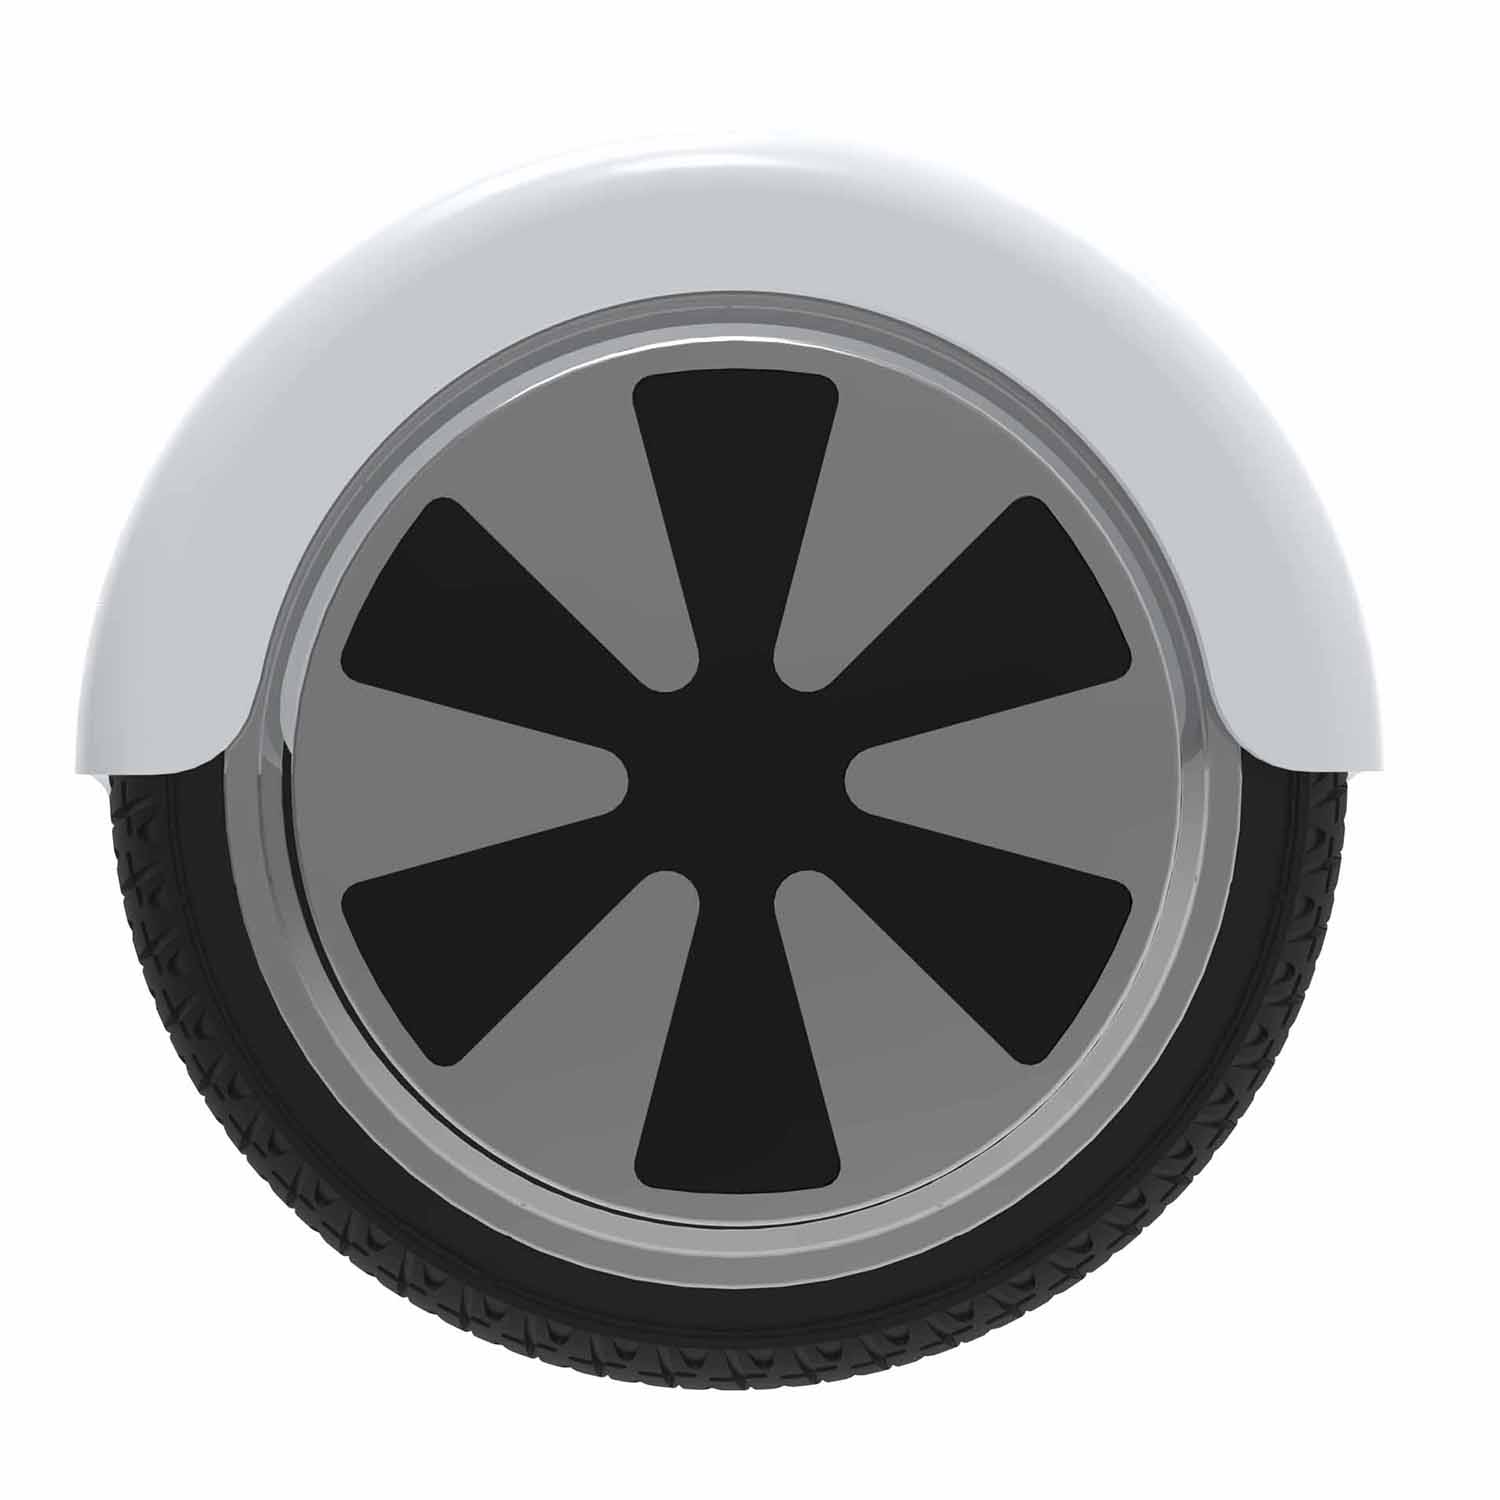 Hover-1 Ultra UL Certified Electric Hoverboard w/ 6.5" Wheels and LED Lights - White - image 4 of 5